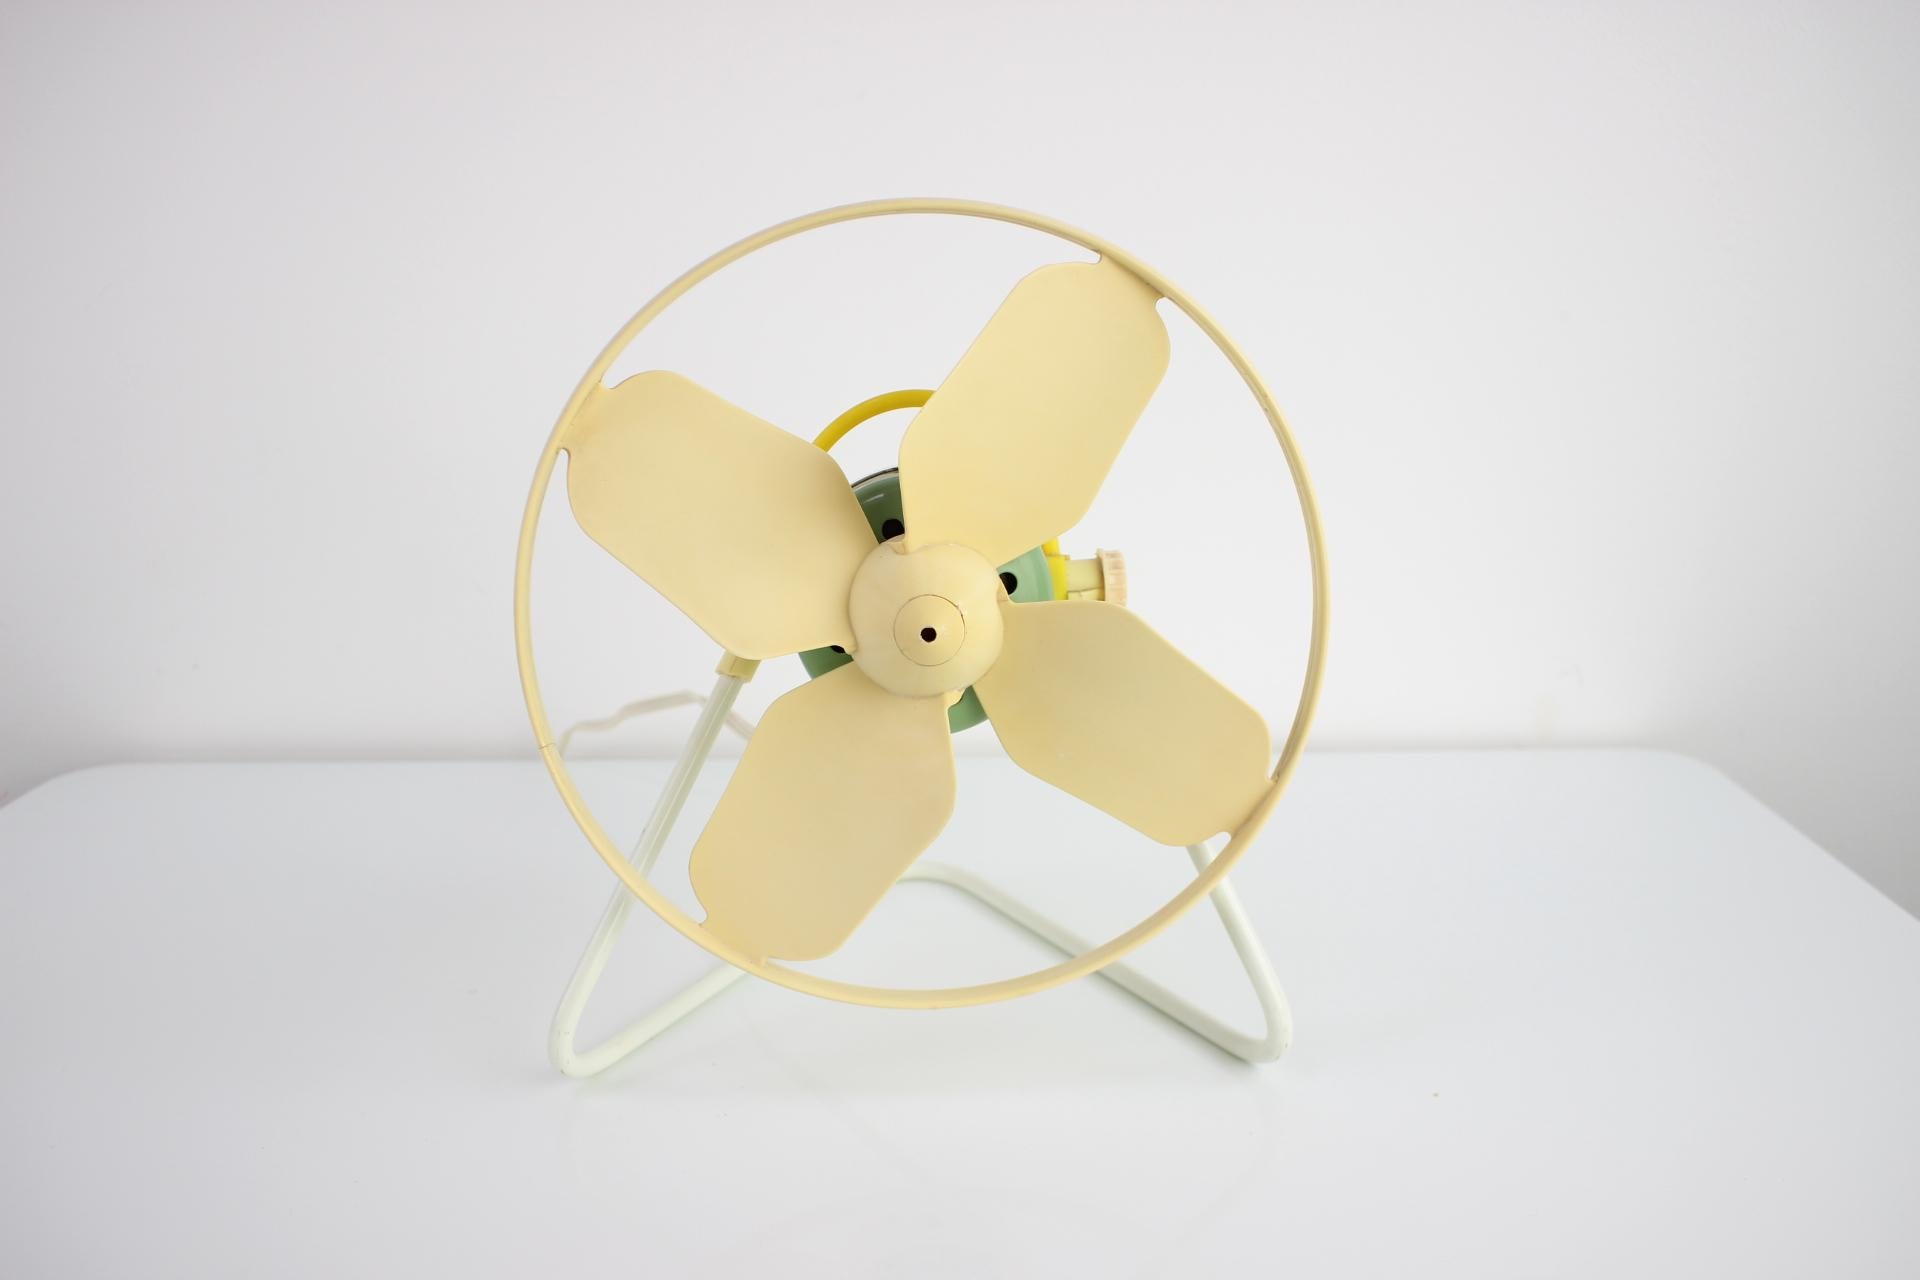 Vintage industrial table fan
Made of metal and plastic
Fully functional.